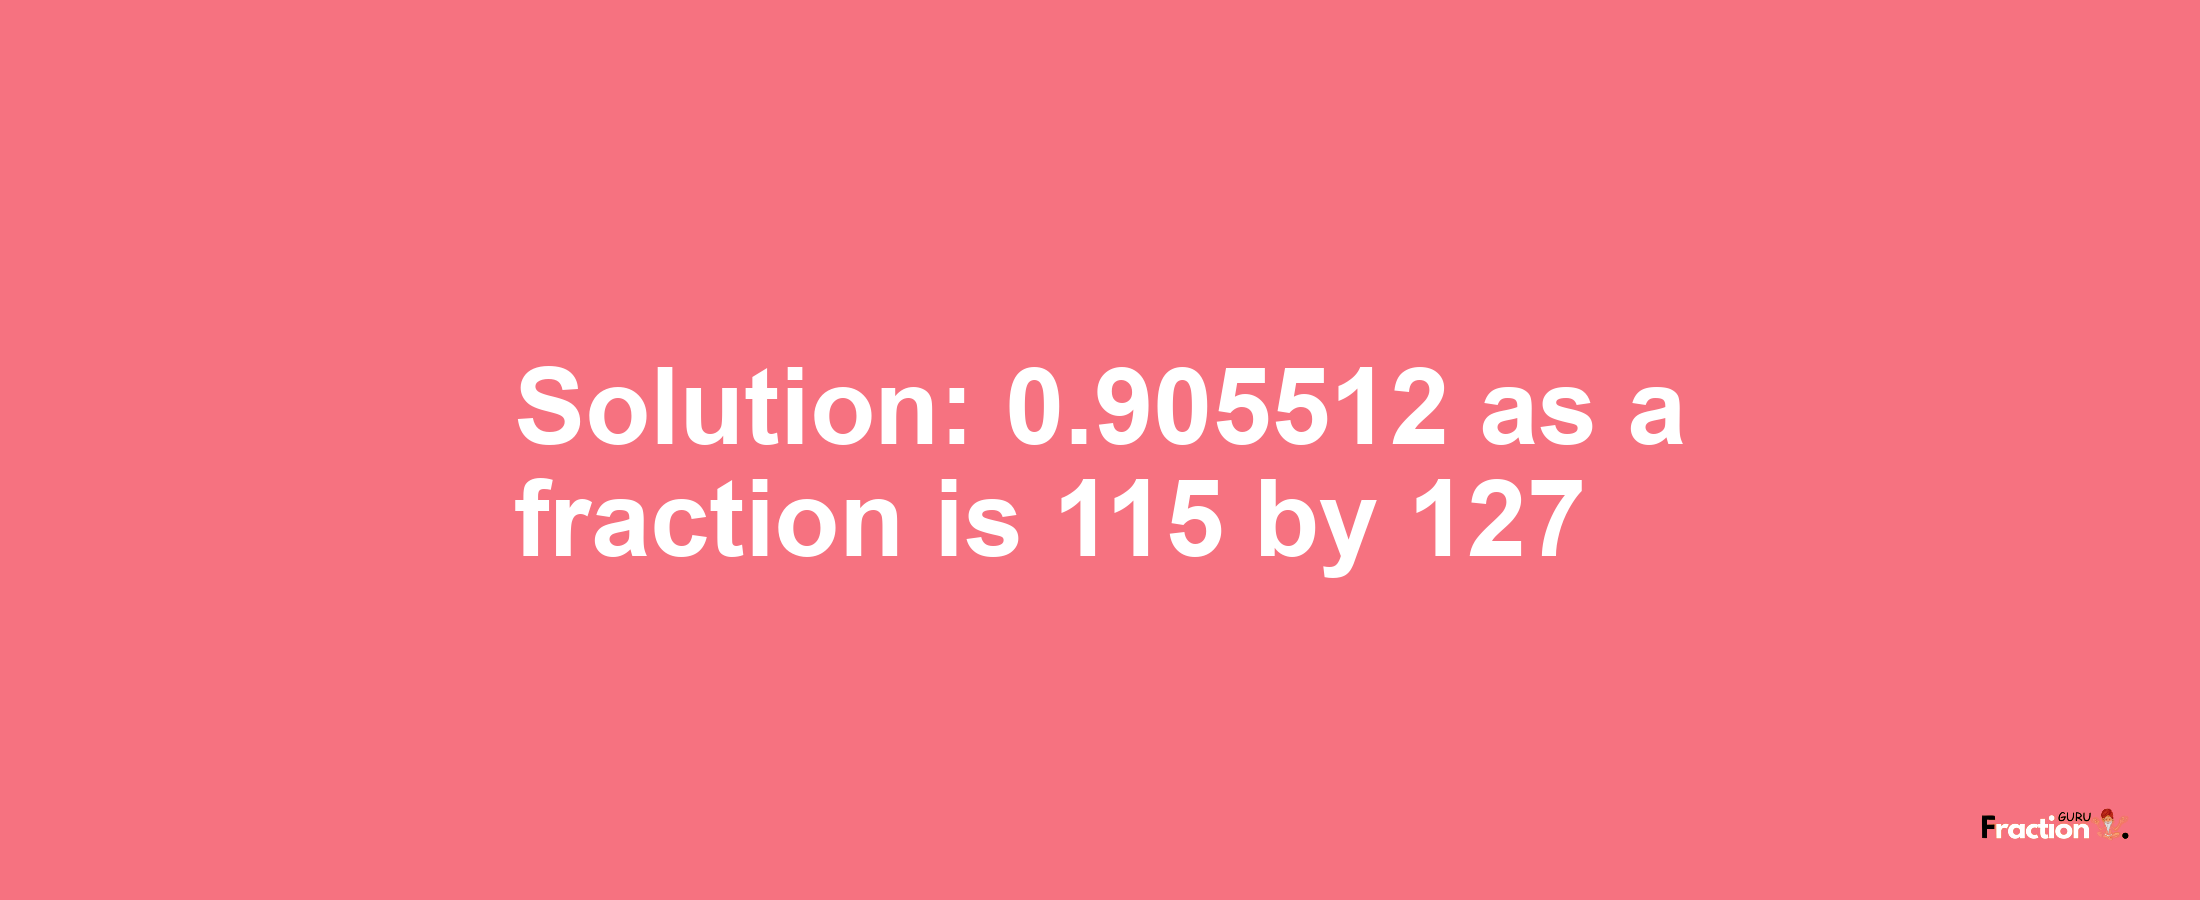 Solution:0.905512 as a fraction is 115/127